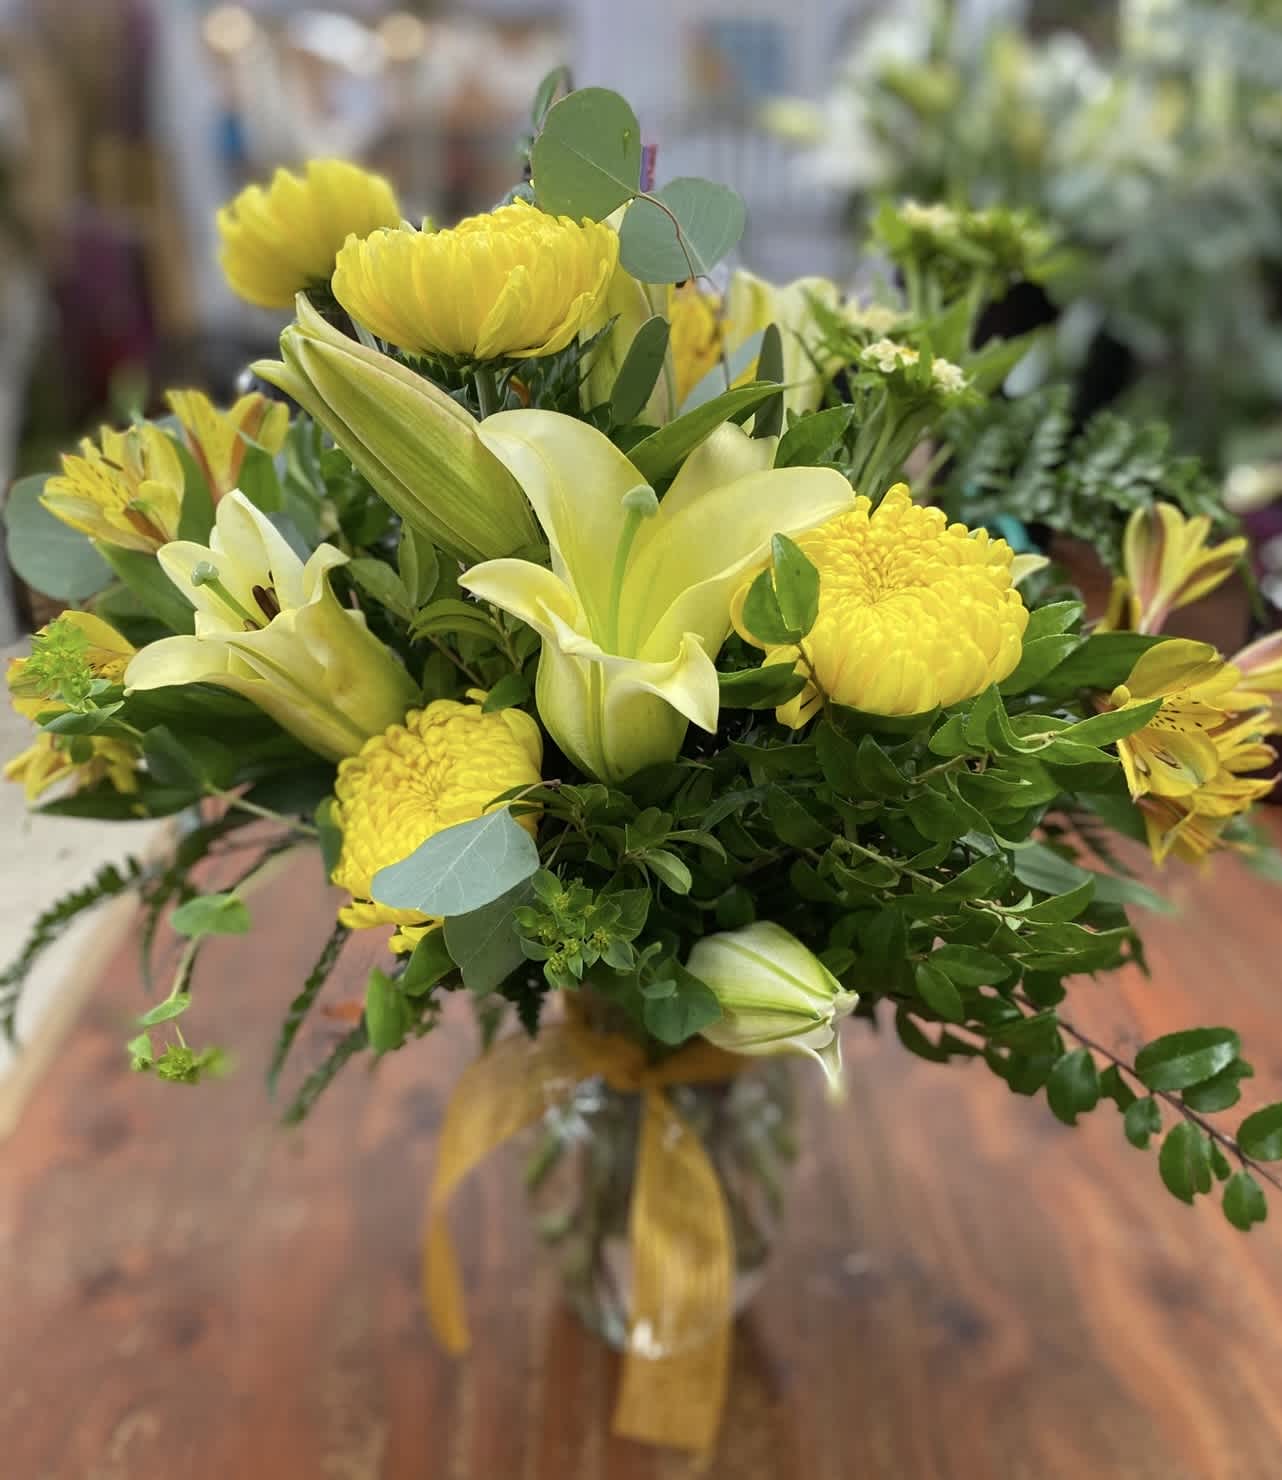 Mellow Yellow - A variety of mixed yellow flowers will make anyone smile. Flowers may be subsituted.